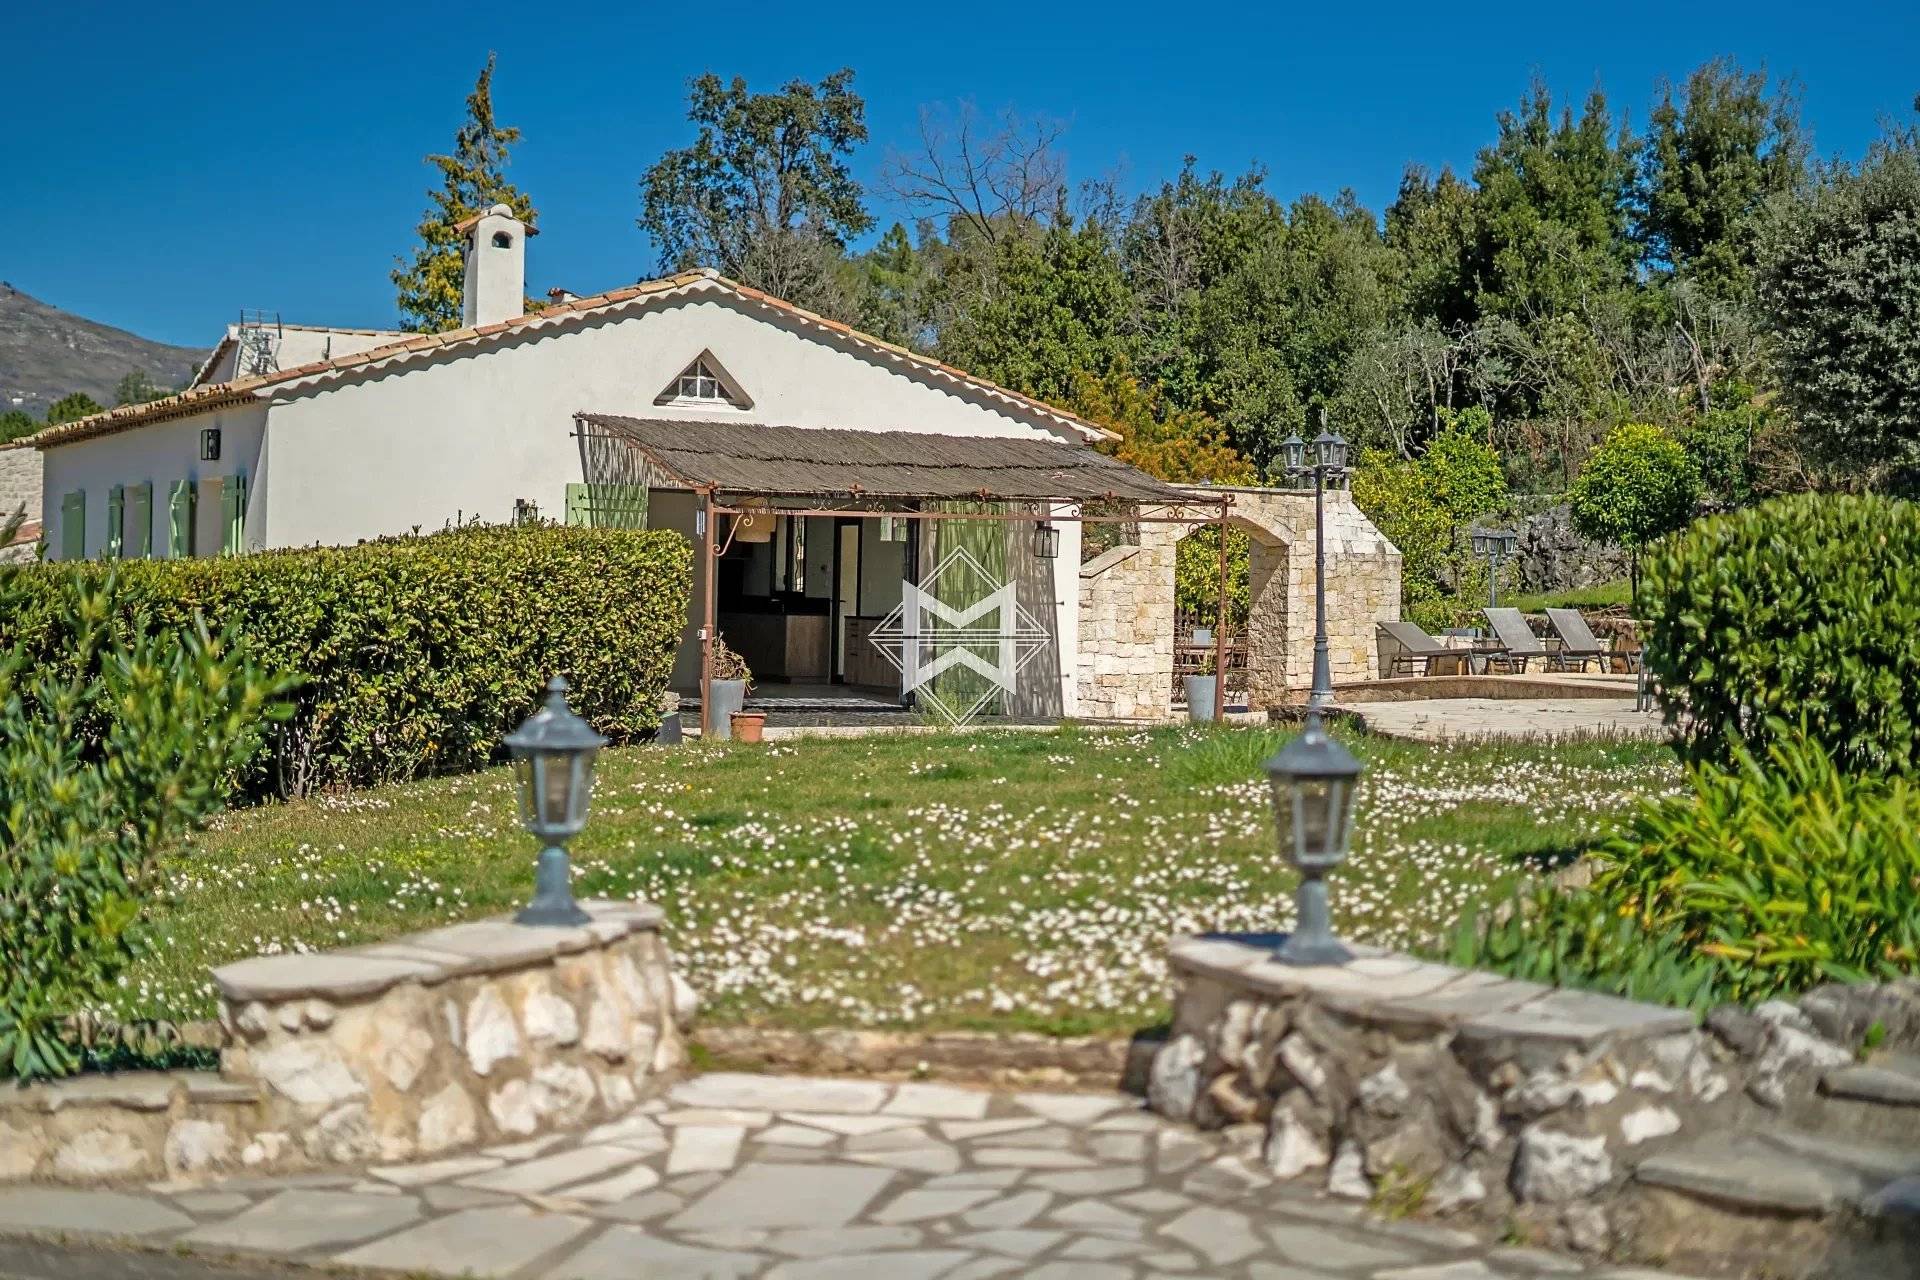 Renovated Provencal style villa in total peace and quiet